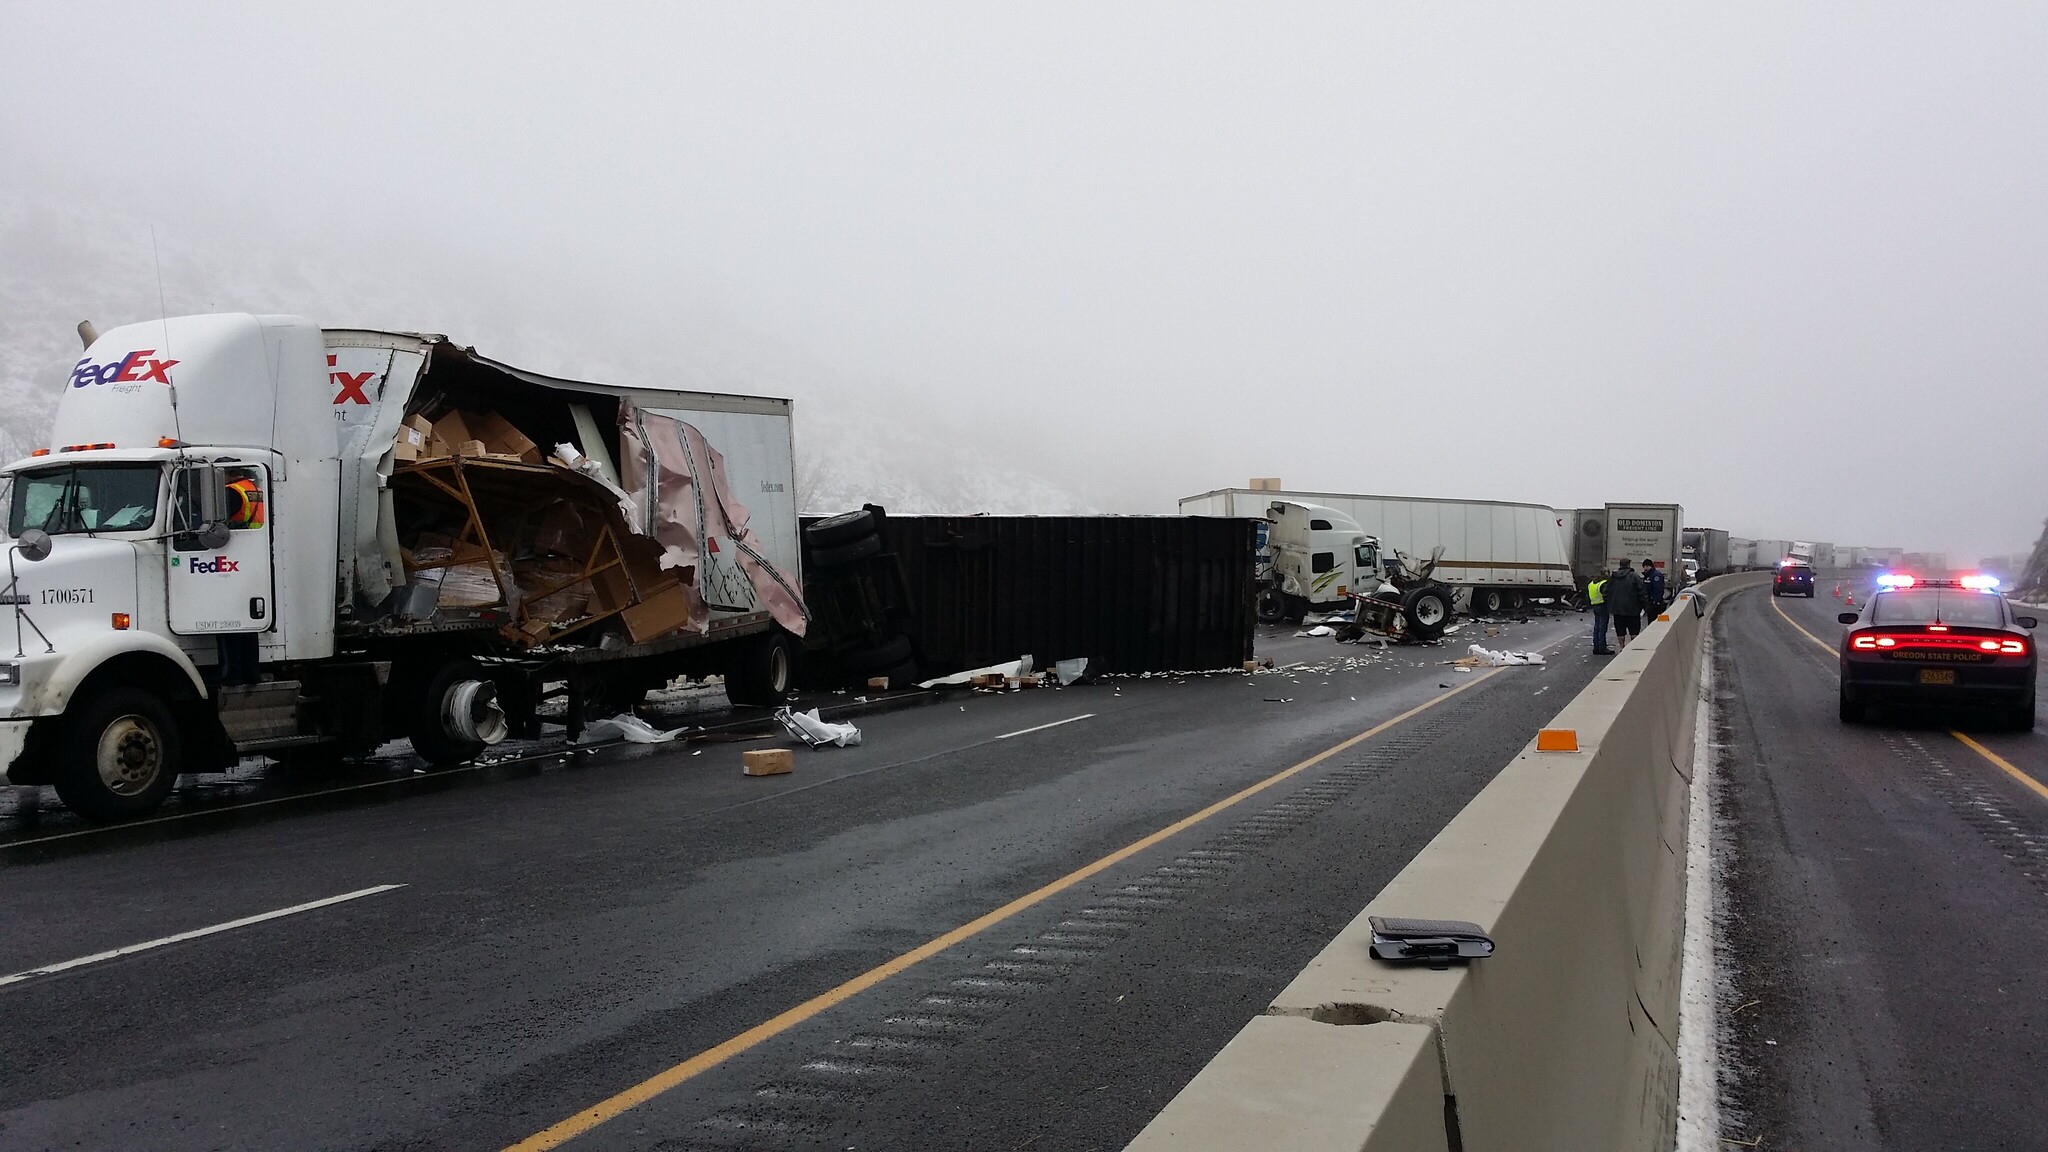 Crash closes I-84; image by OR DoT, via Flickr, CC BY 2.0.